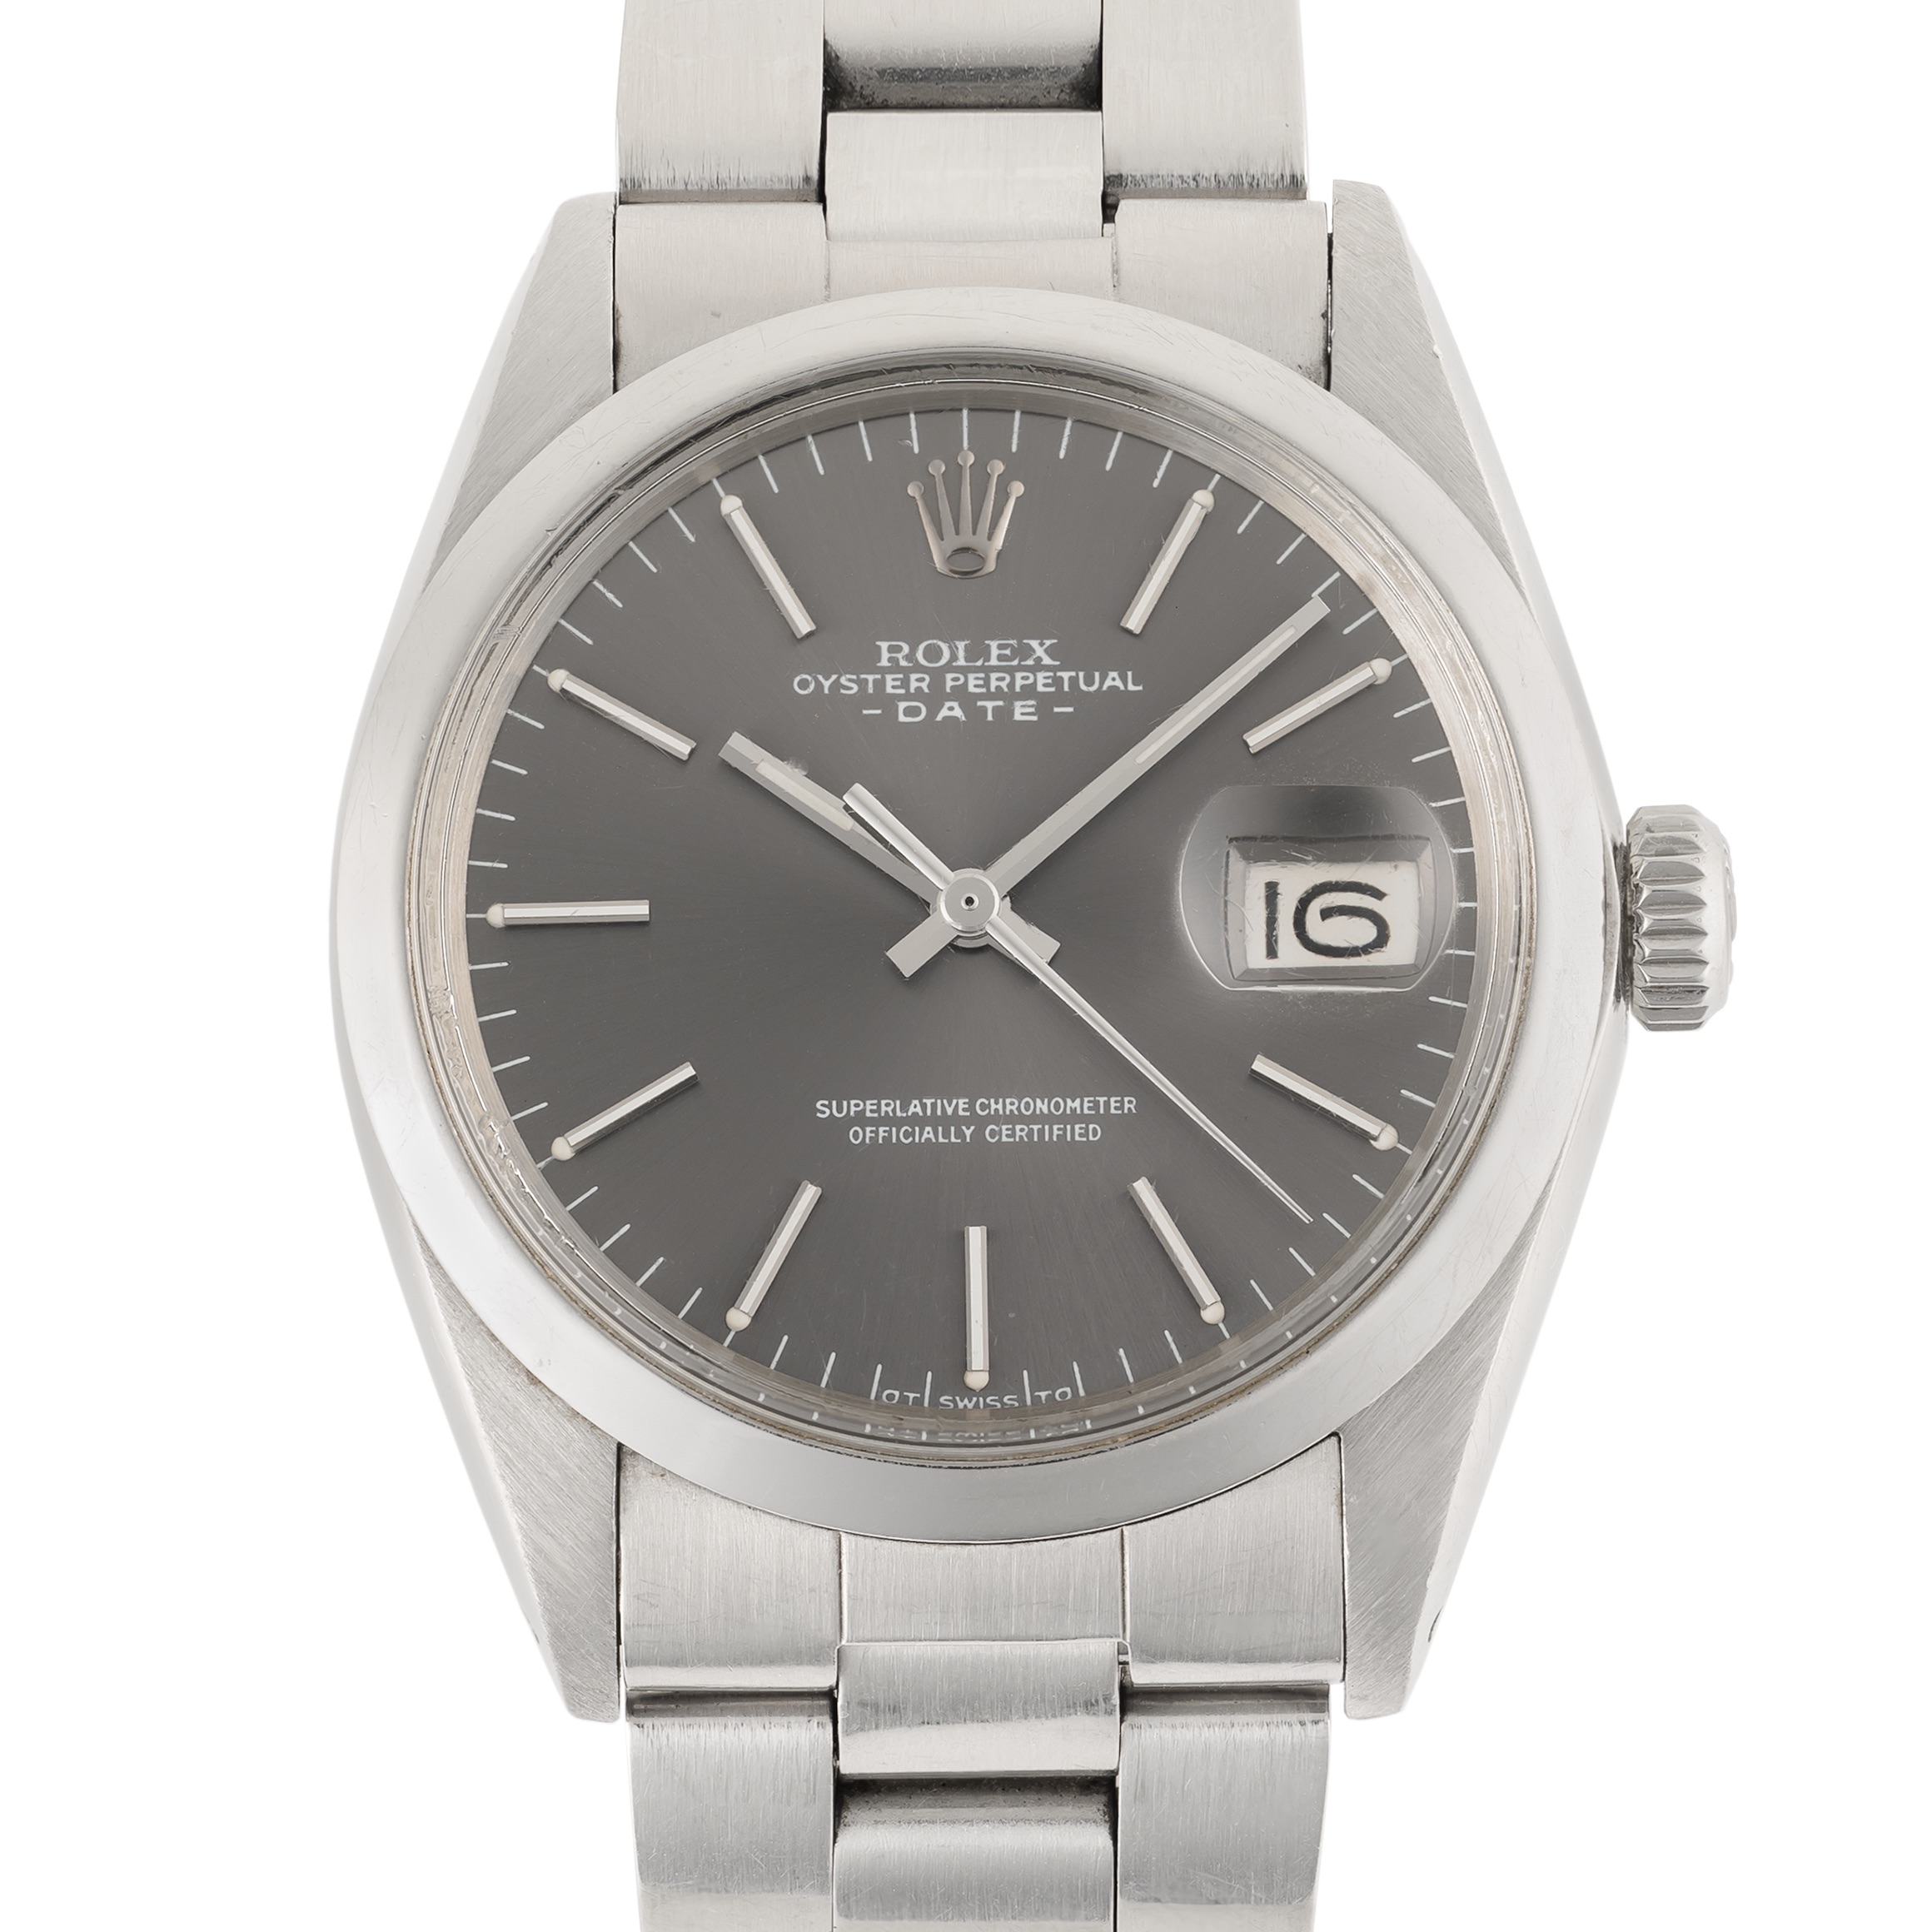 A GENTLEMAN'S SIZE STAINLESS STEEL ROLEX OYSTER PERPETUAL DATE WRIST WATCH CIRCA 1972, REF. 1500